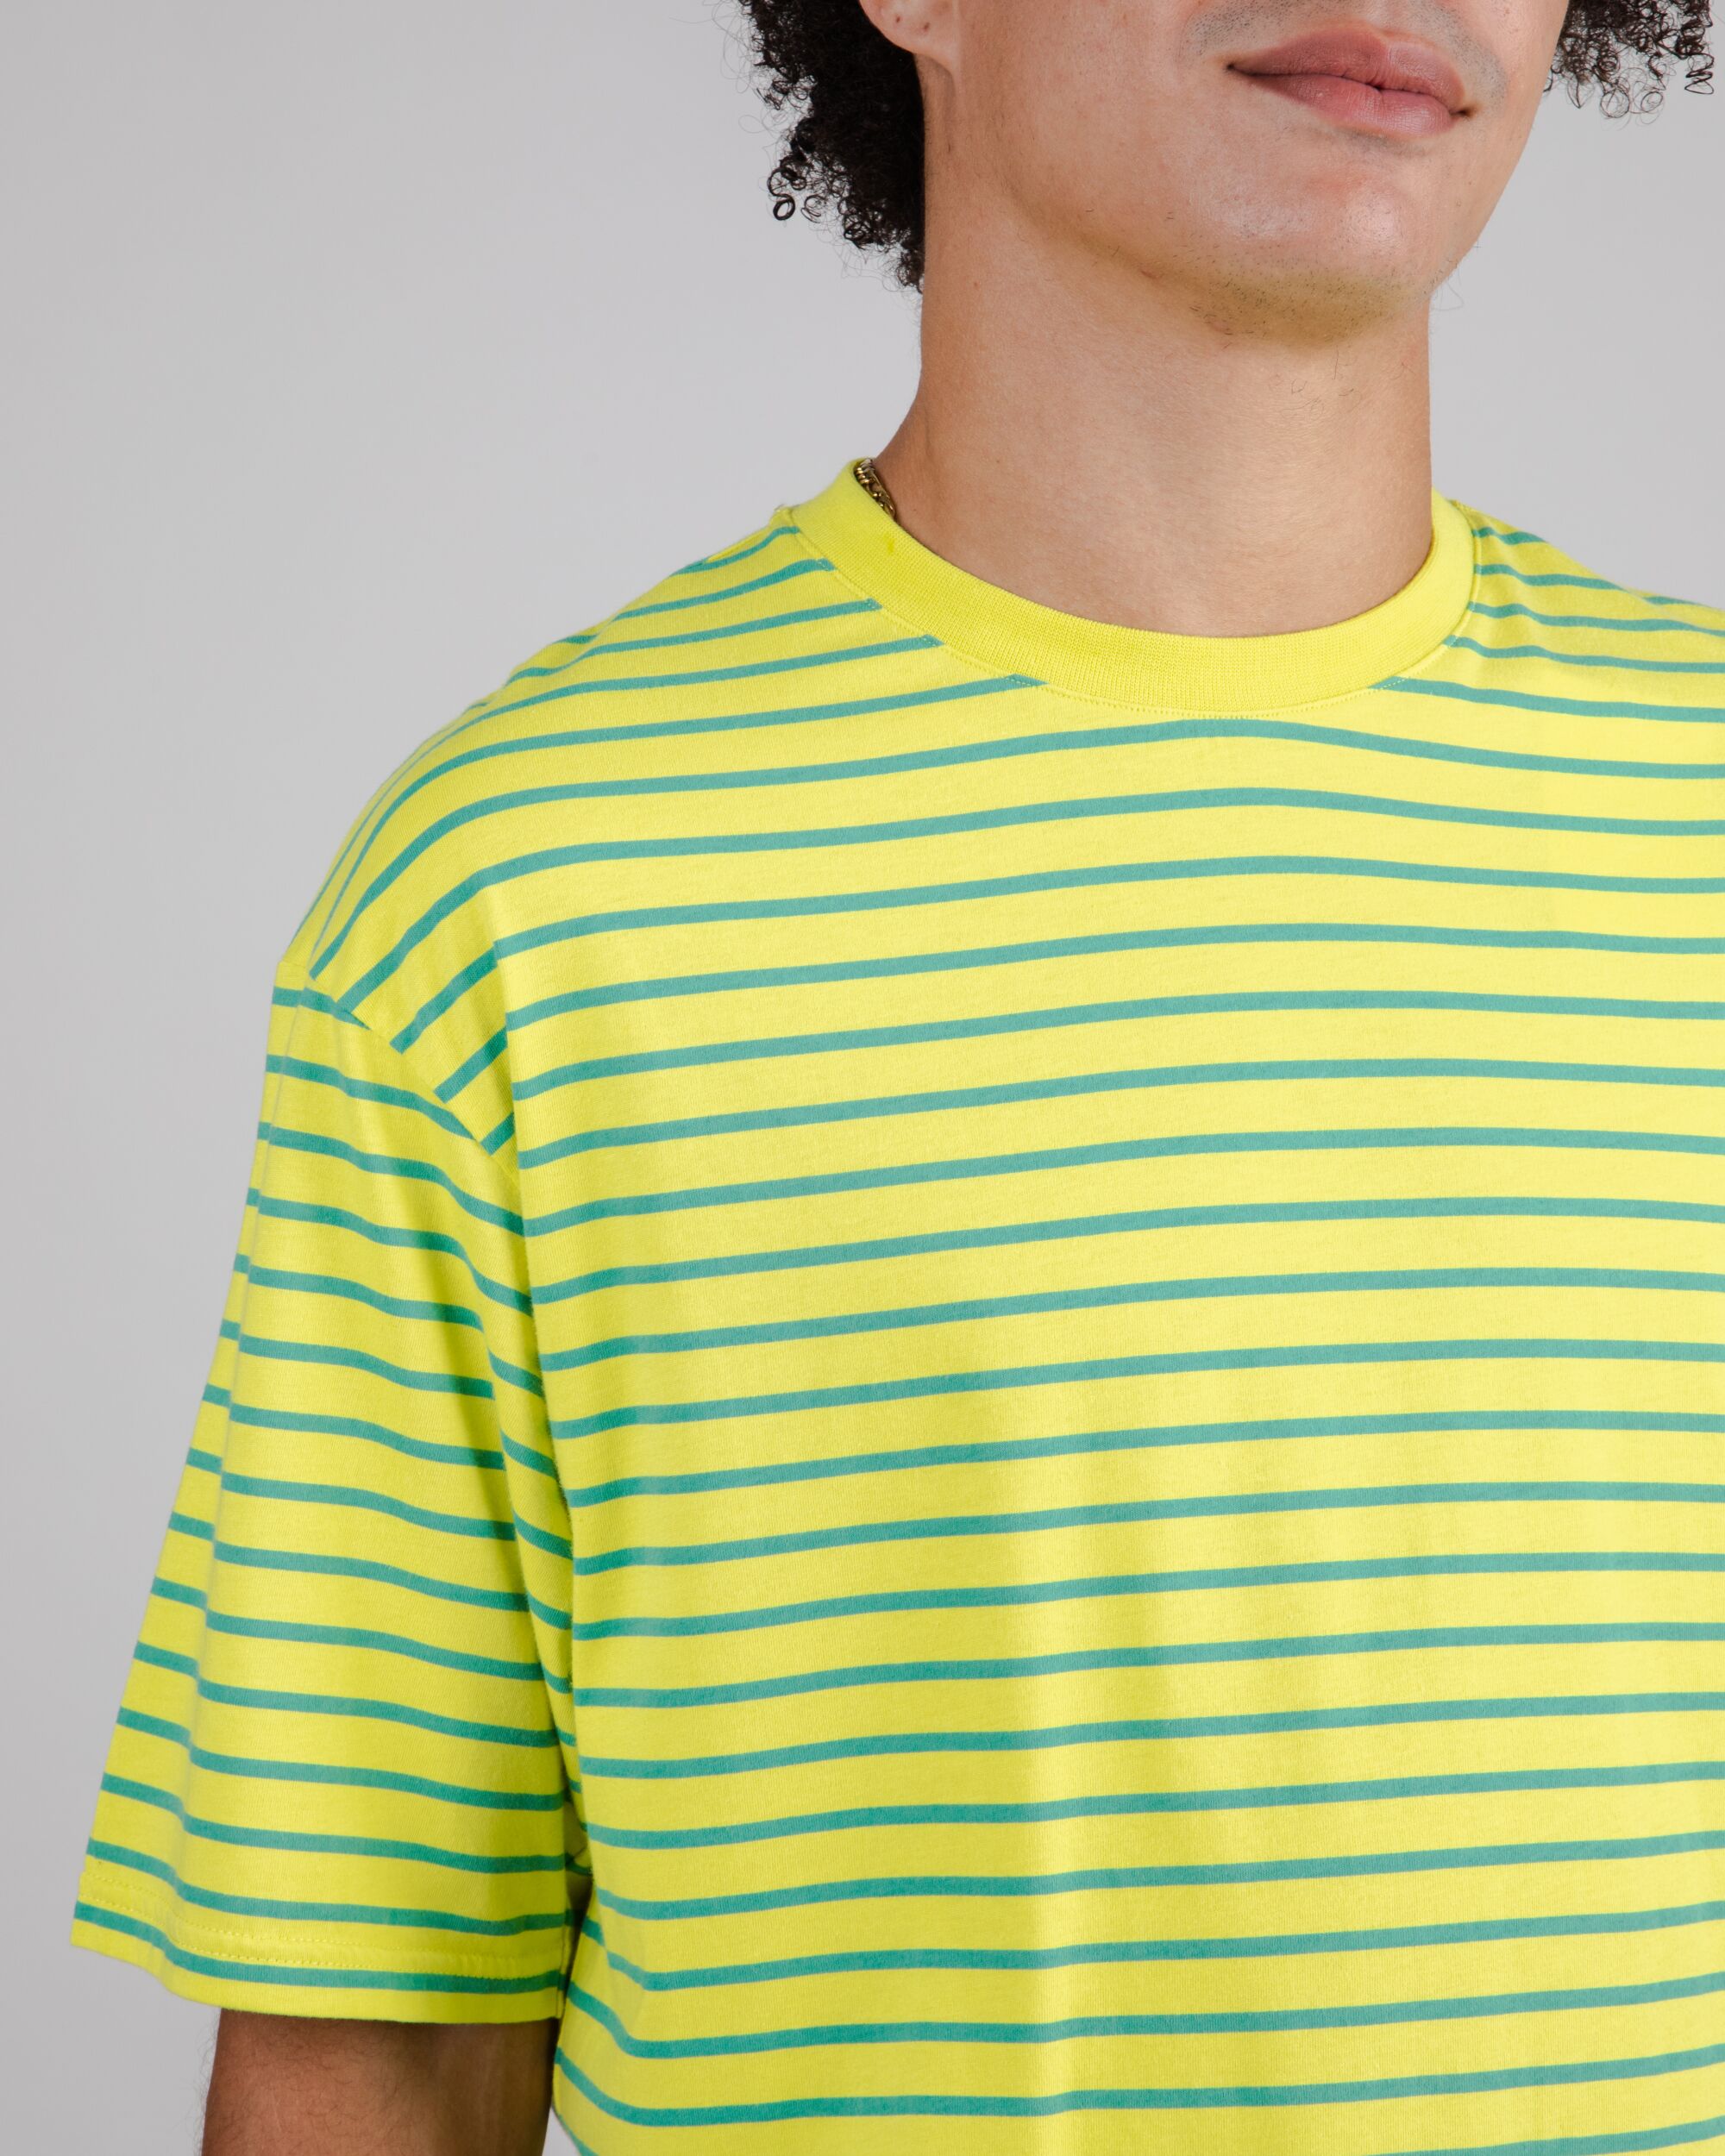 Oversize T-shirt Stripes in Lime made from organic cotton by Brava Fabrics